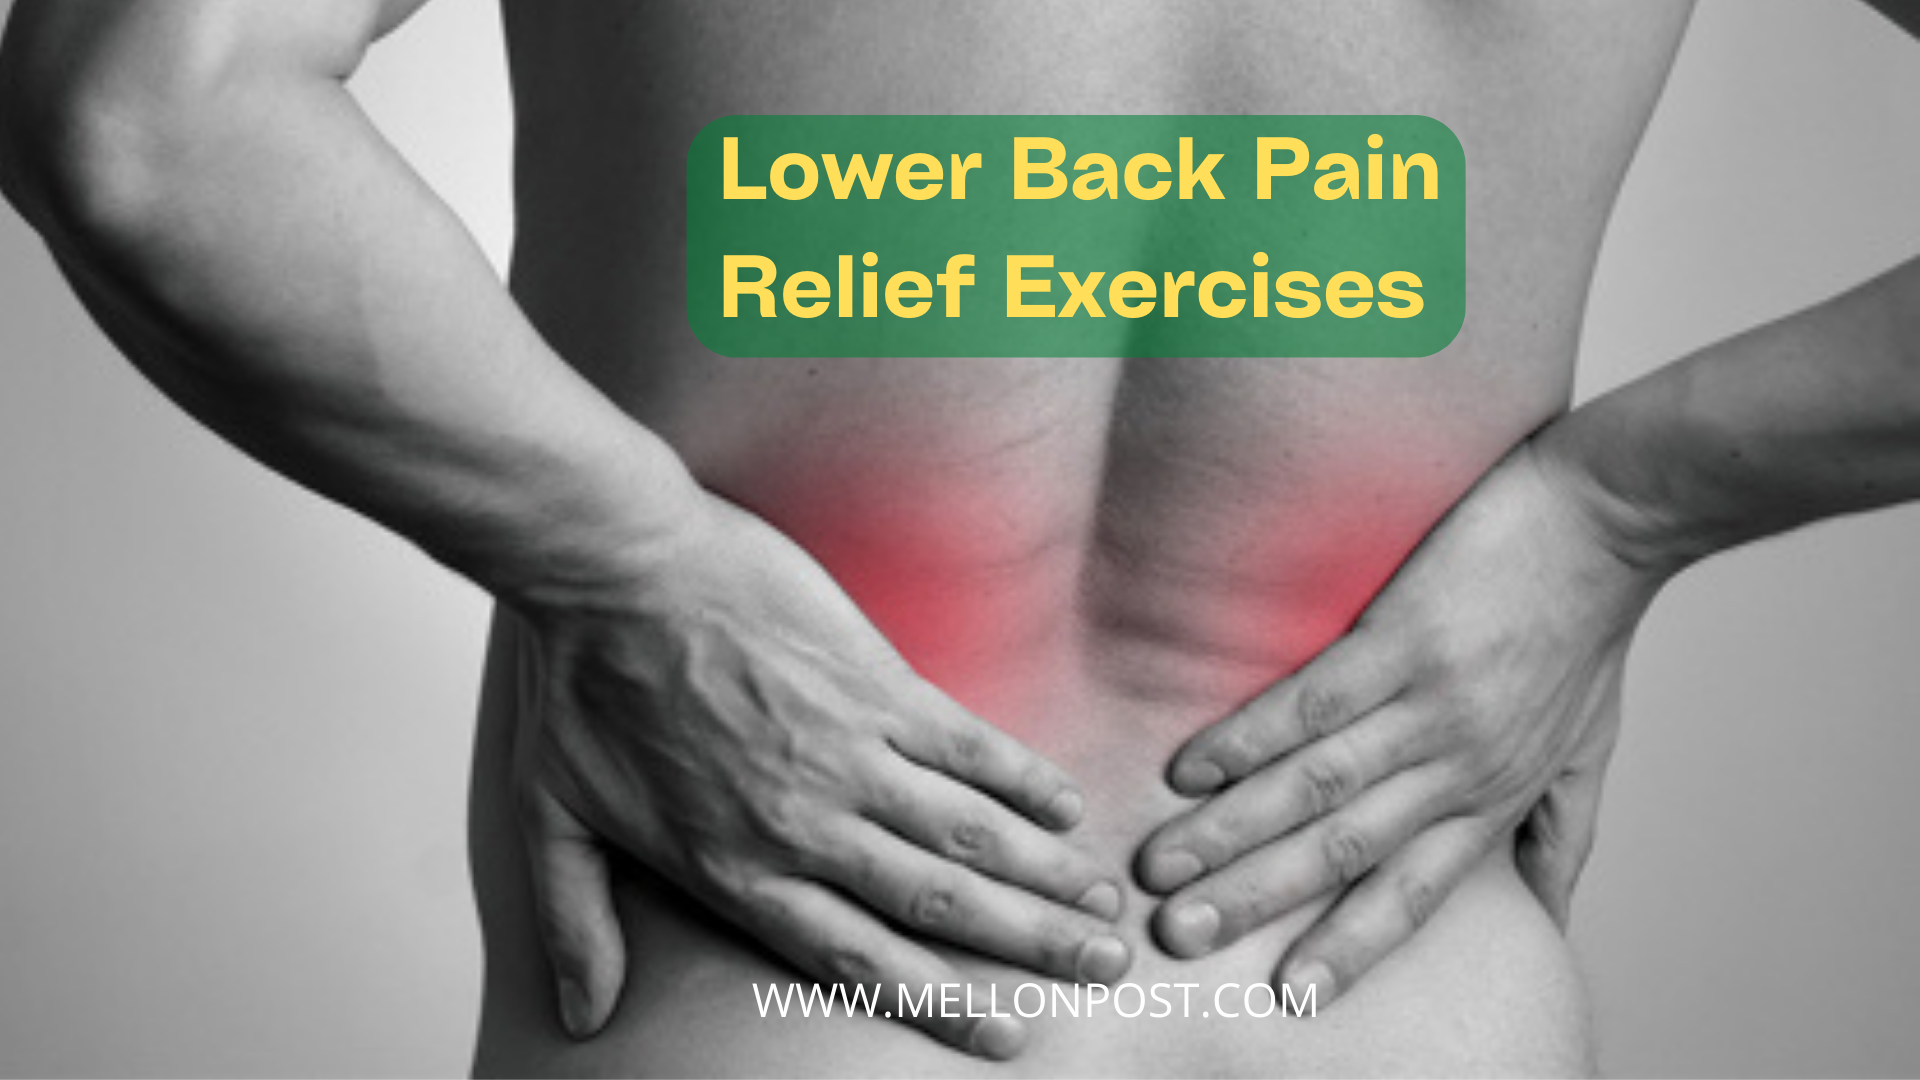 5 Simple Exercises for Immediate Lower Back Pain Relief